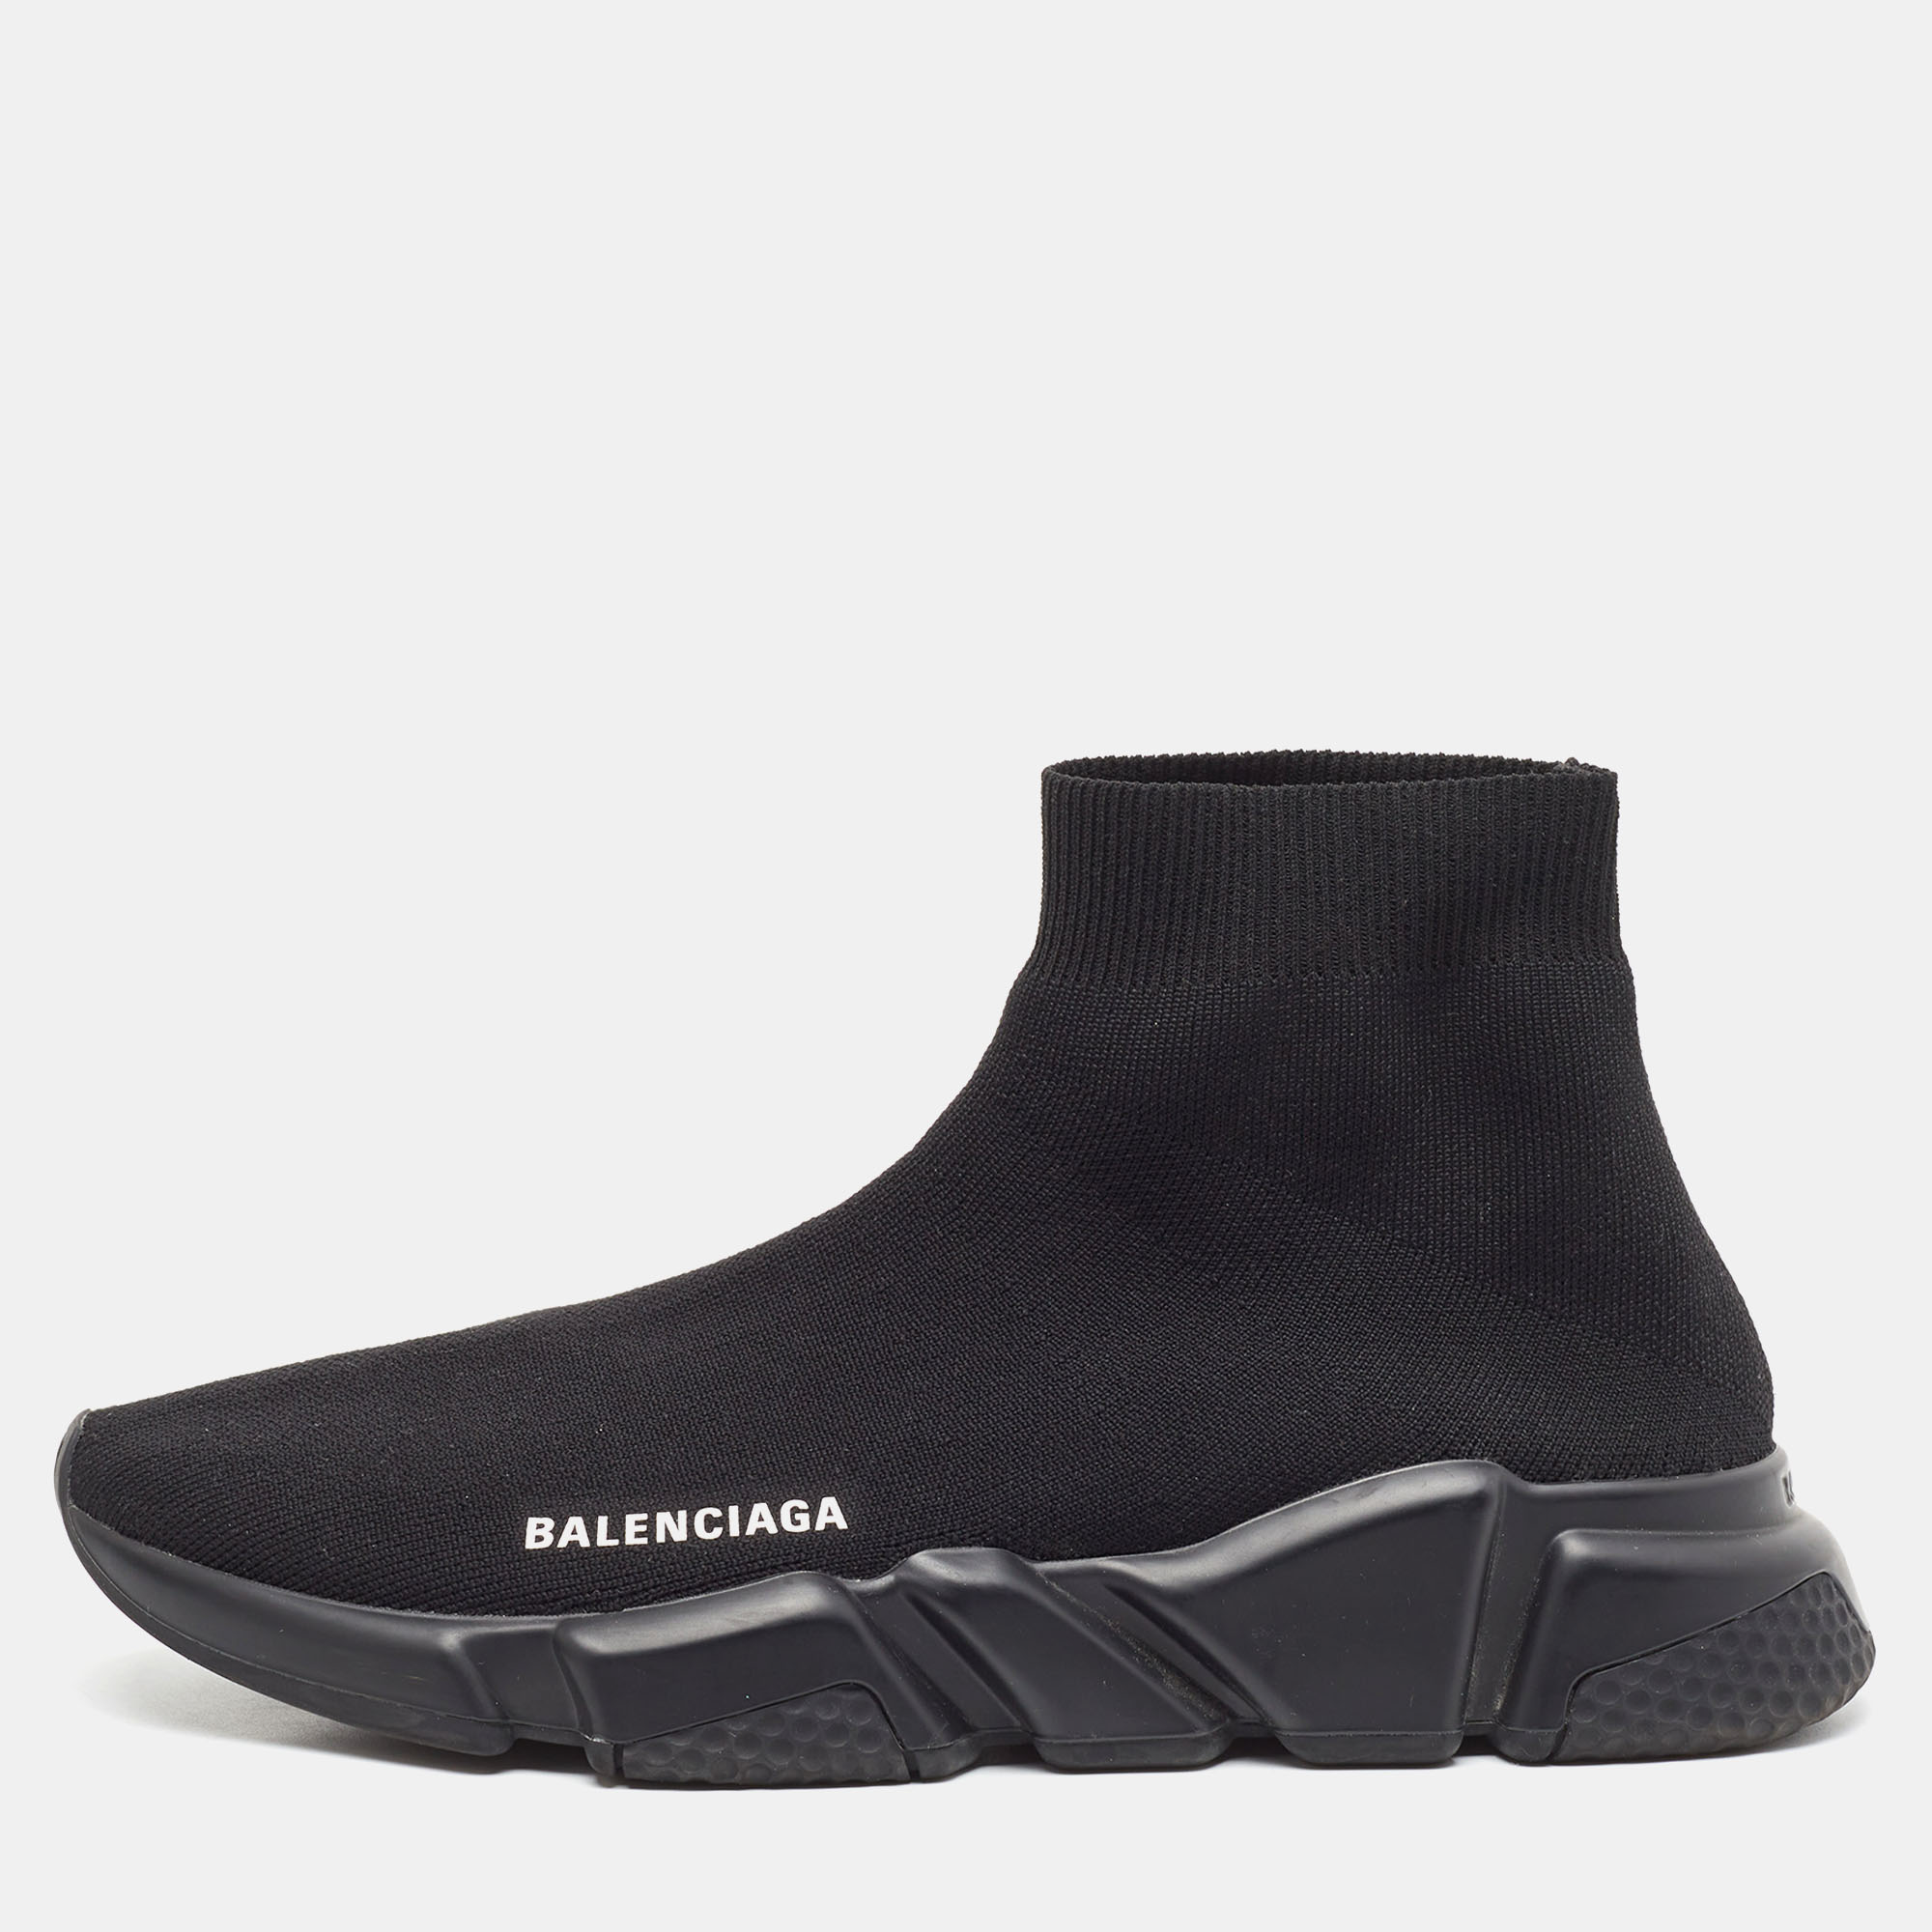 Pre-owned Balenciaga Black Knit Fabric Speed Trainer Trainers Size 41